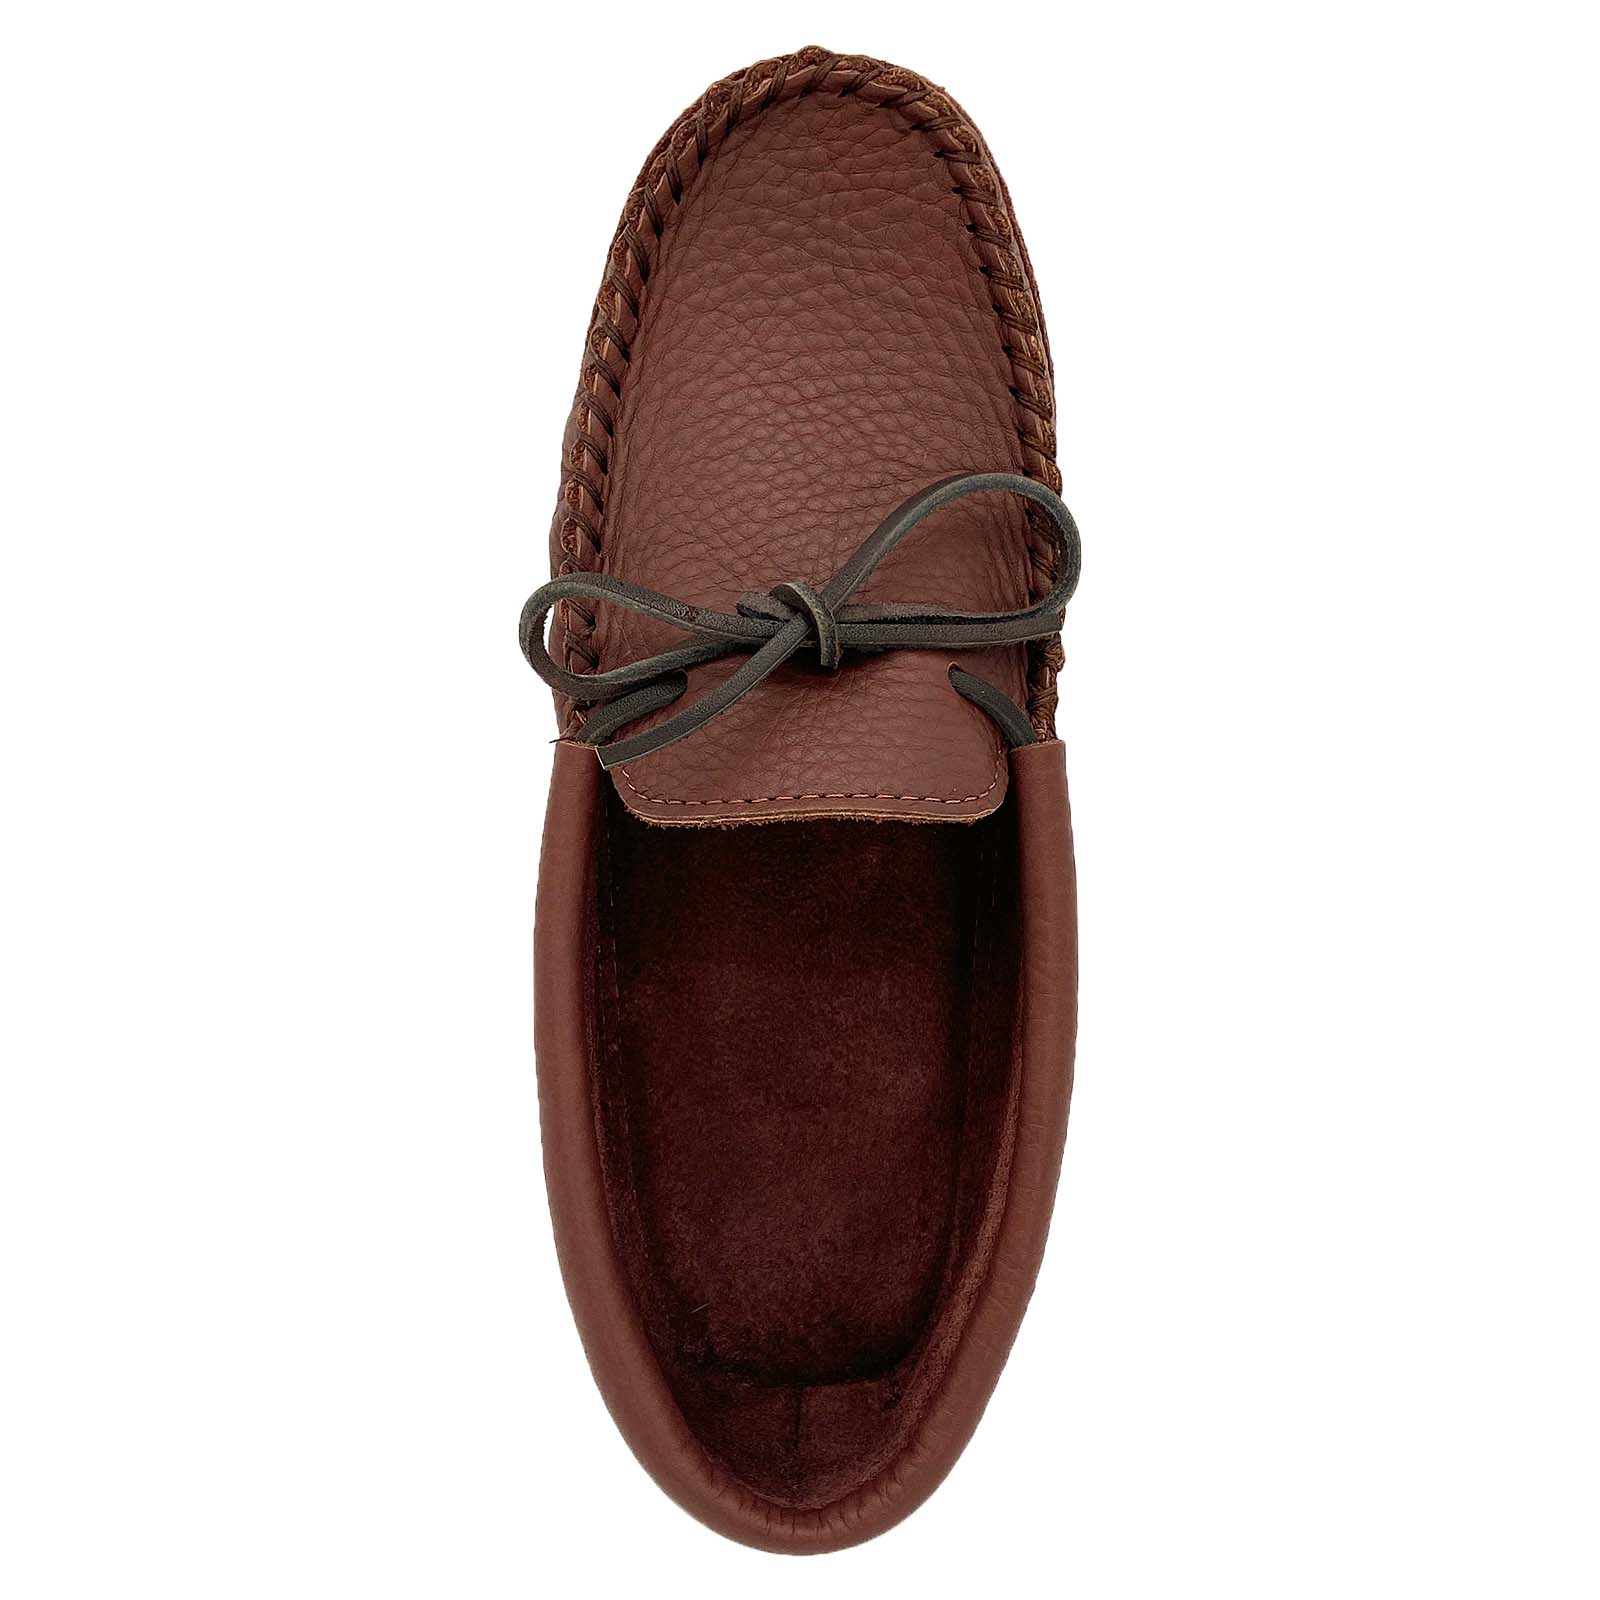 Men's Woodstain Brown Leather Moccasins